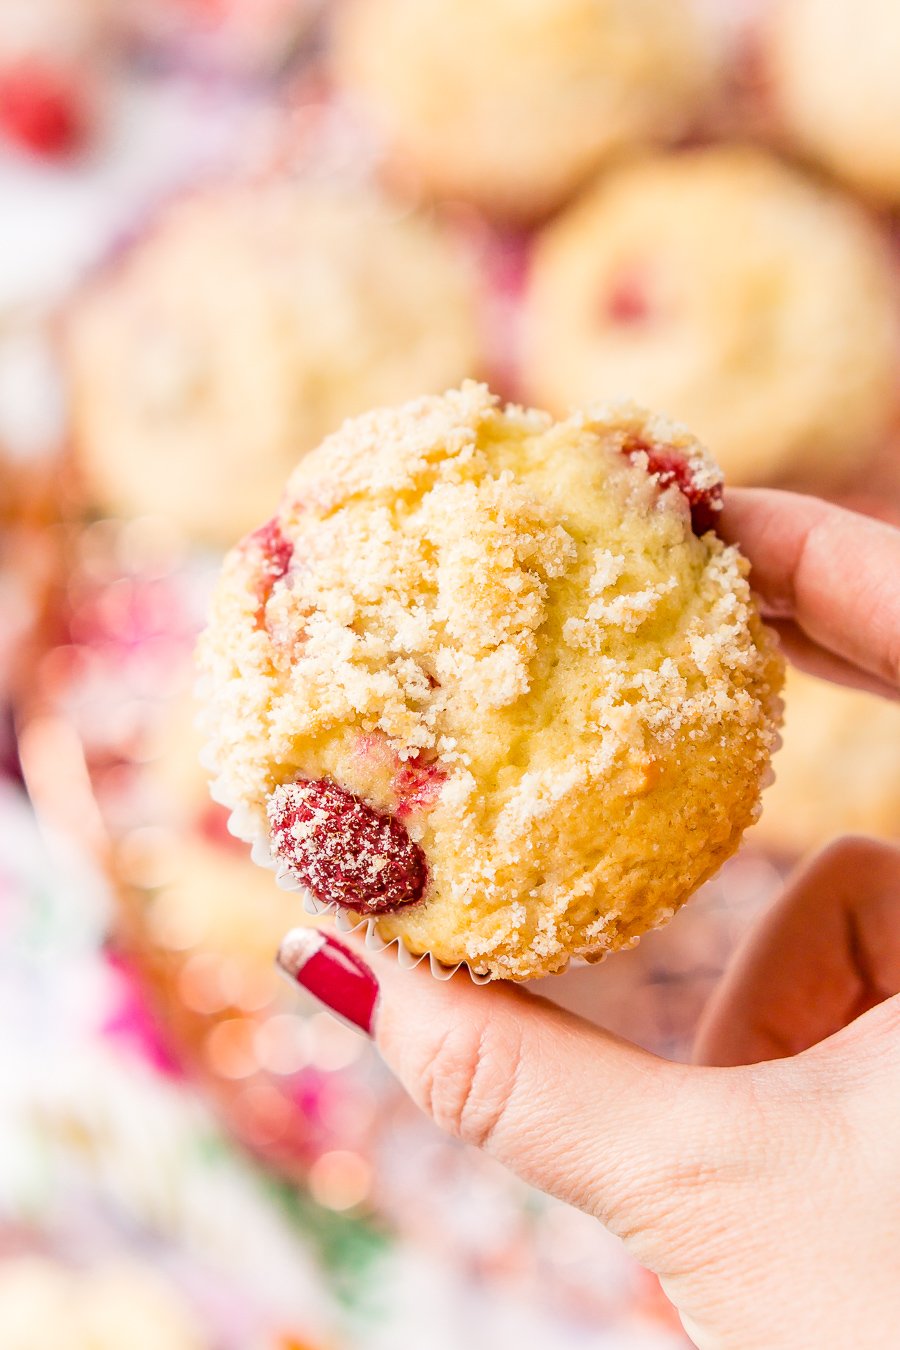 Raspberry Muffins loaded with juicy red raspberries and topped with an irresistible sugar crumble.